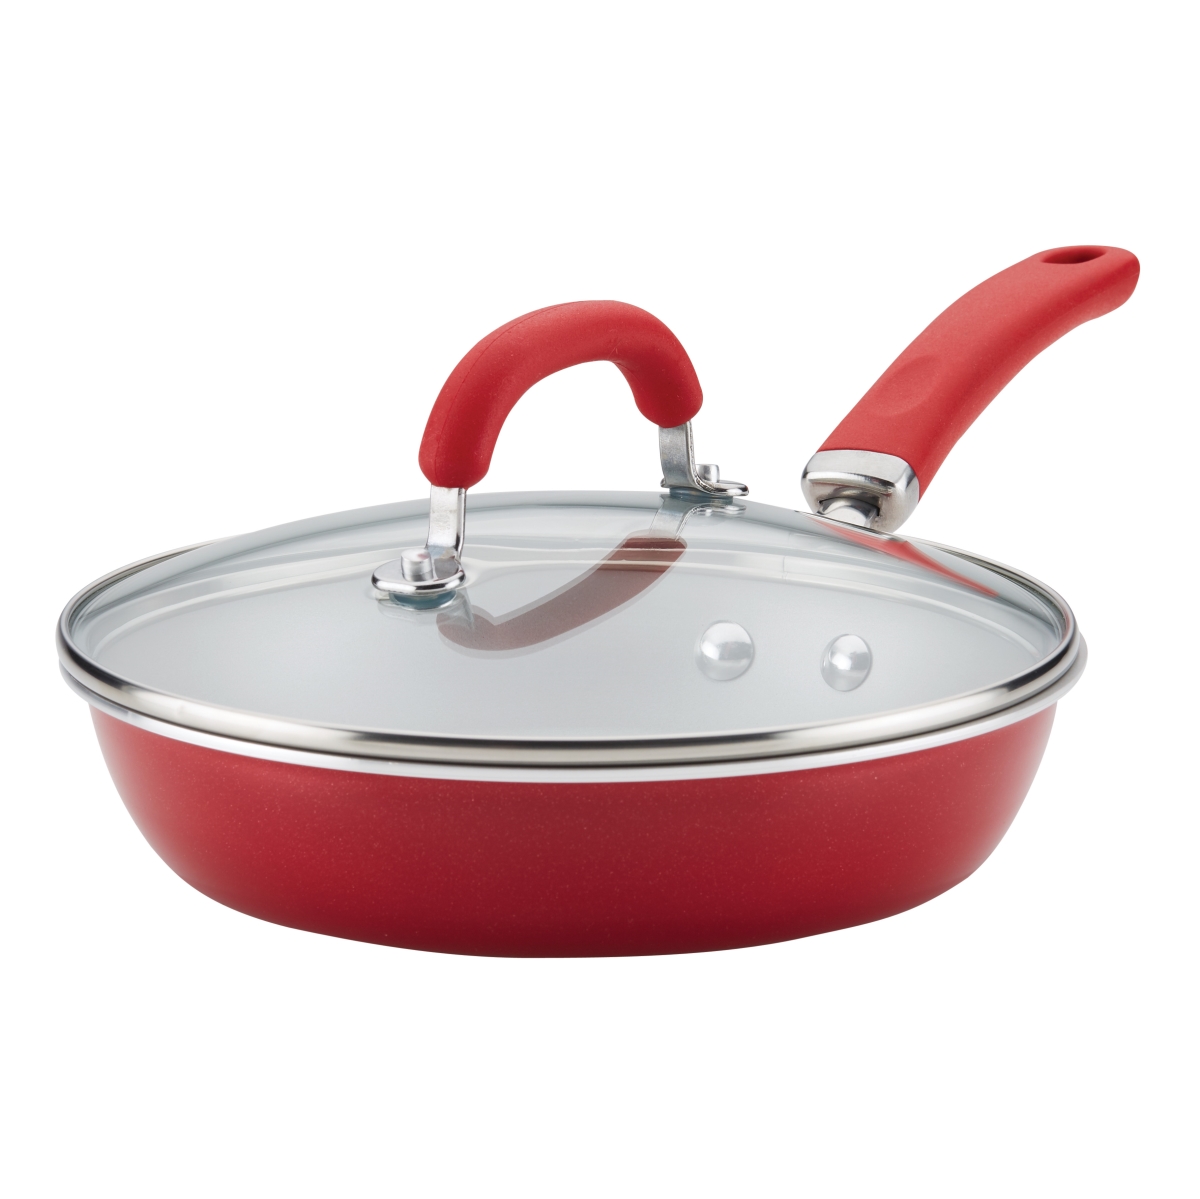 11999 Create Delicious Aluminum Nonstick Covered Deep Skillet, 9.5 In. - Red Shimmer